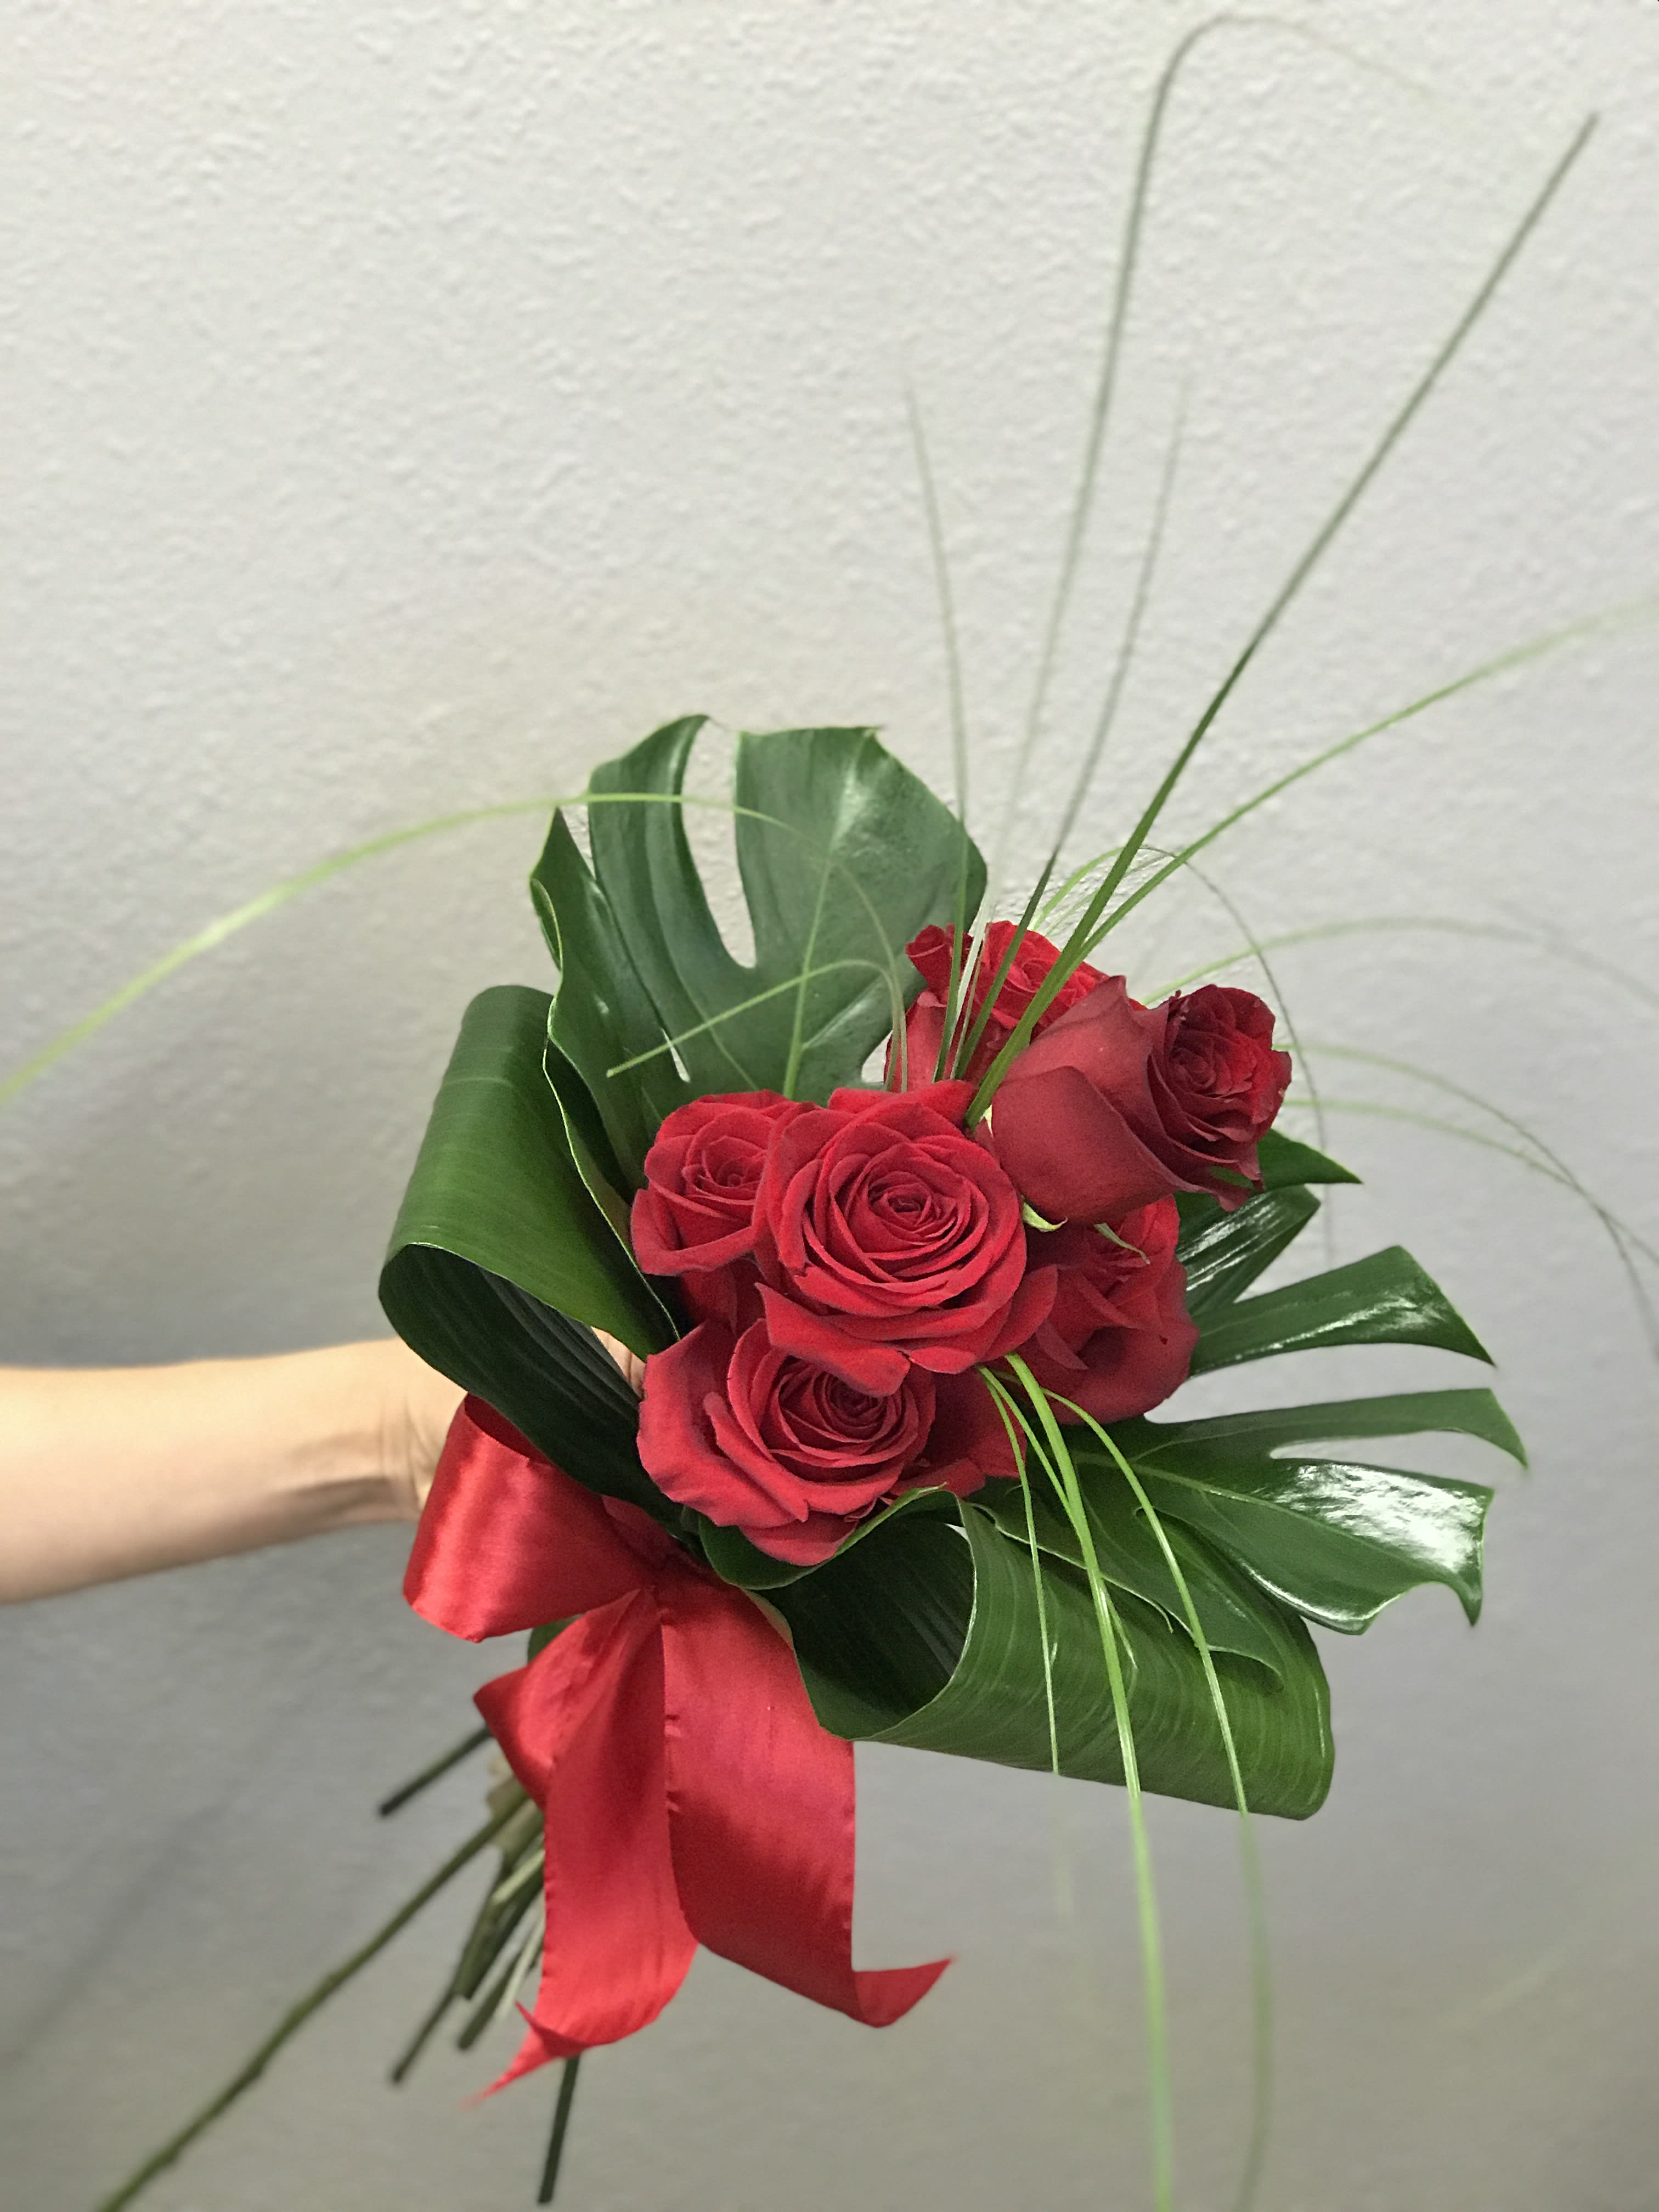 Feeling Hot Hot Hot! - Half a dozen red roses hand tied with tropical greenery is a modern, flirtatious take on this classic holiday.